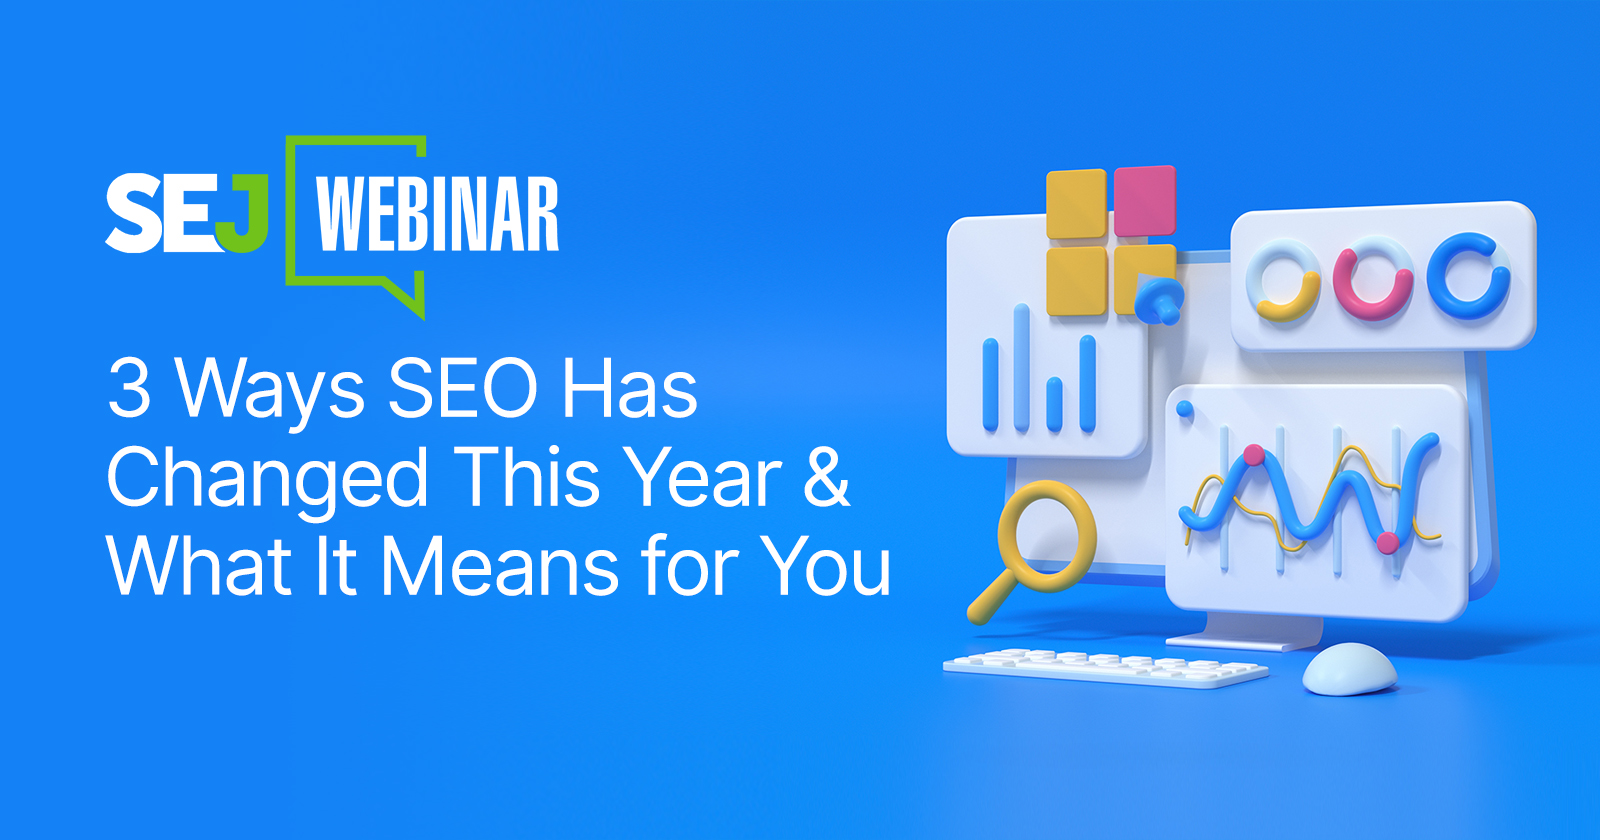 3 Ways SEO Has Changed This Year & What It Means for You [Webinar]